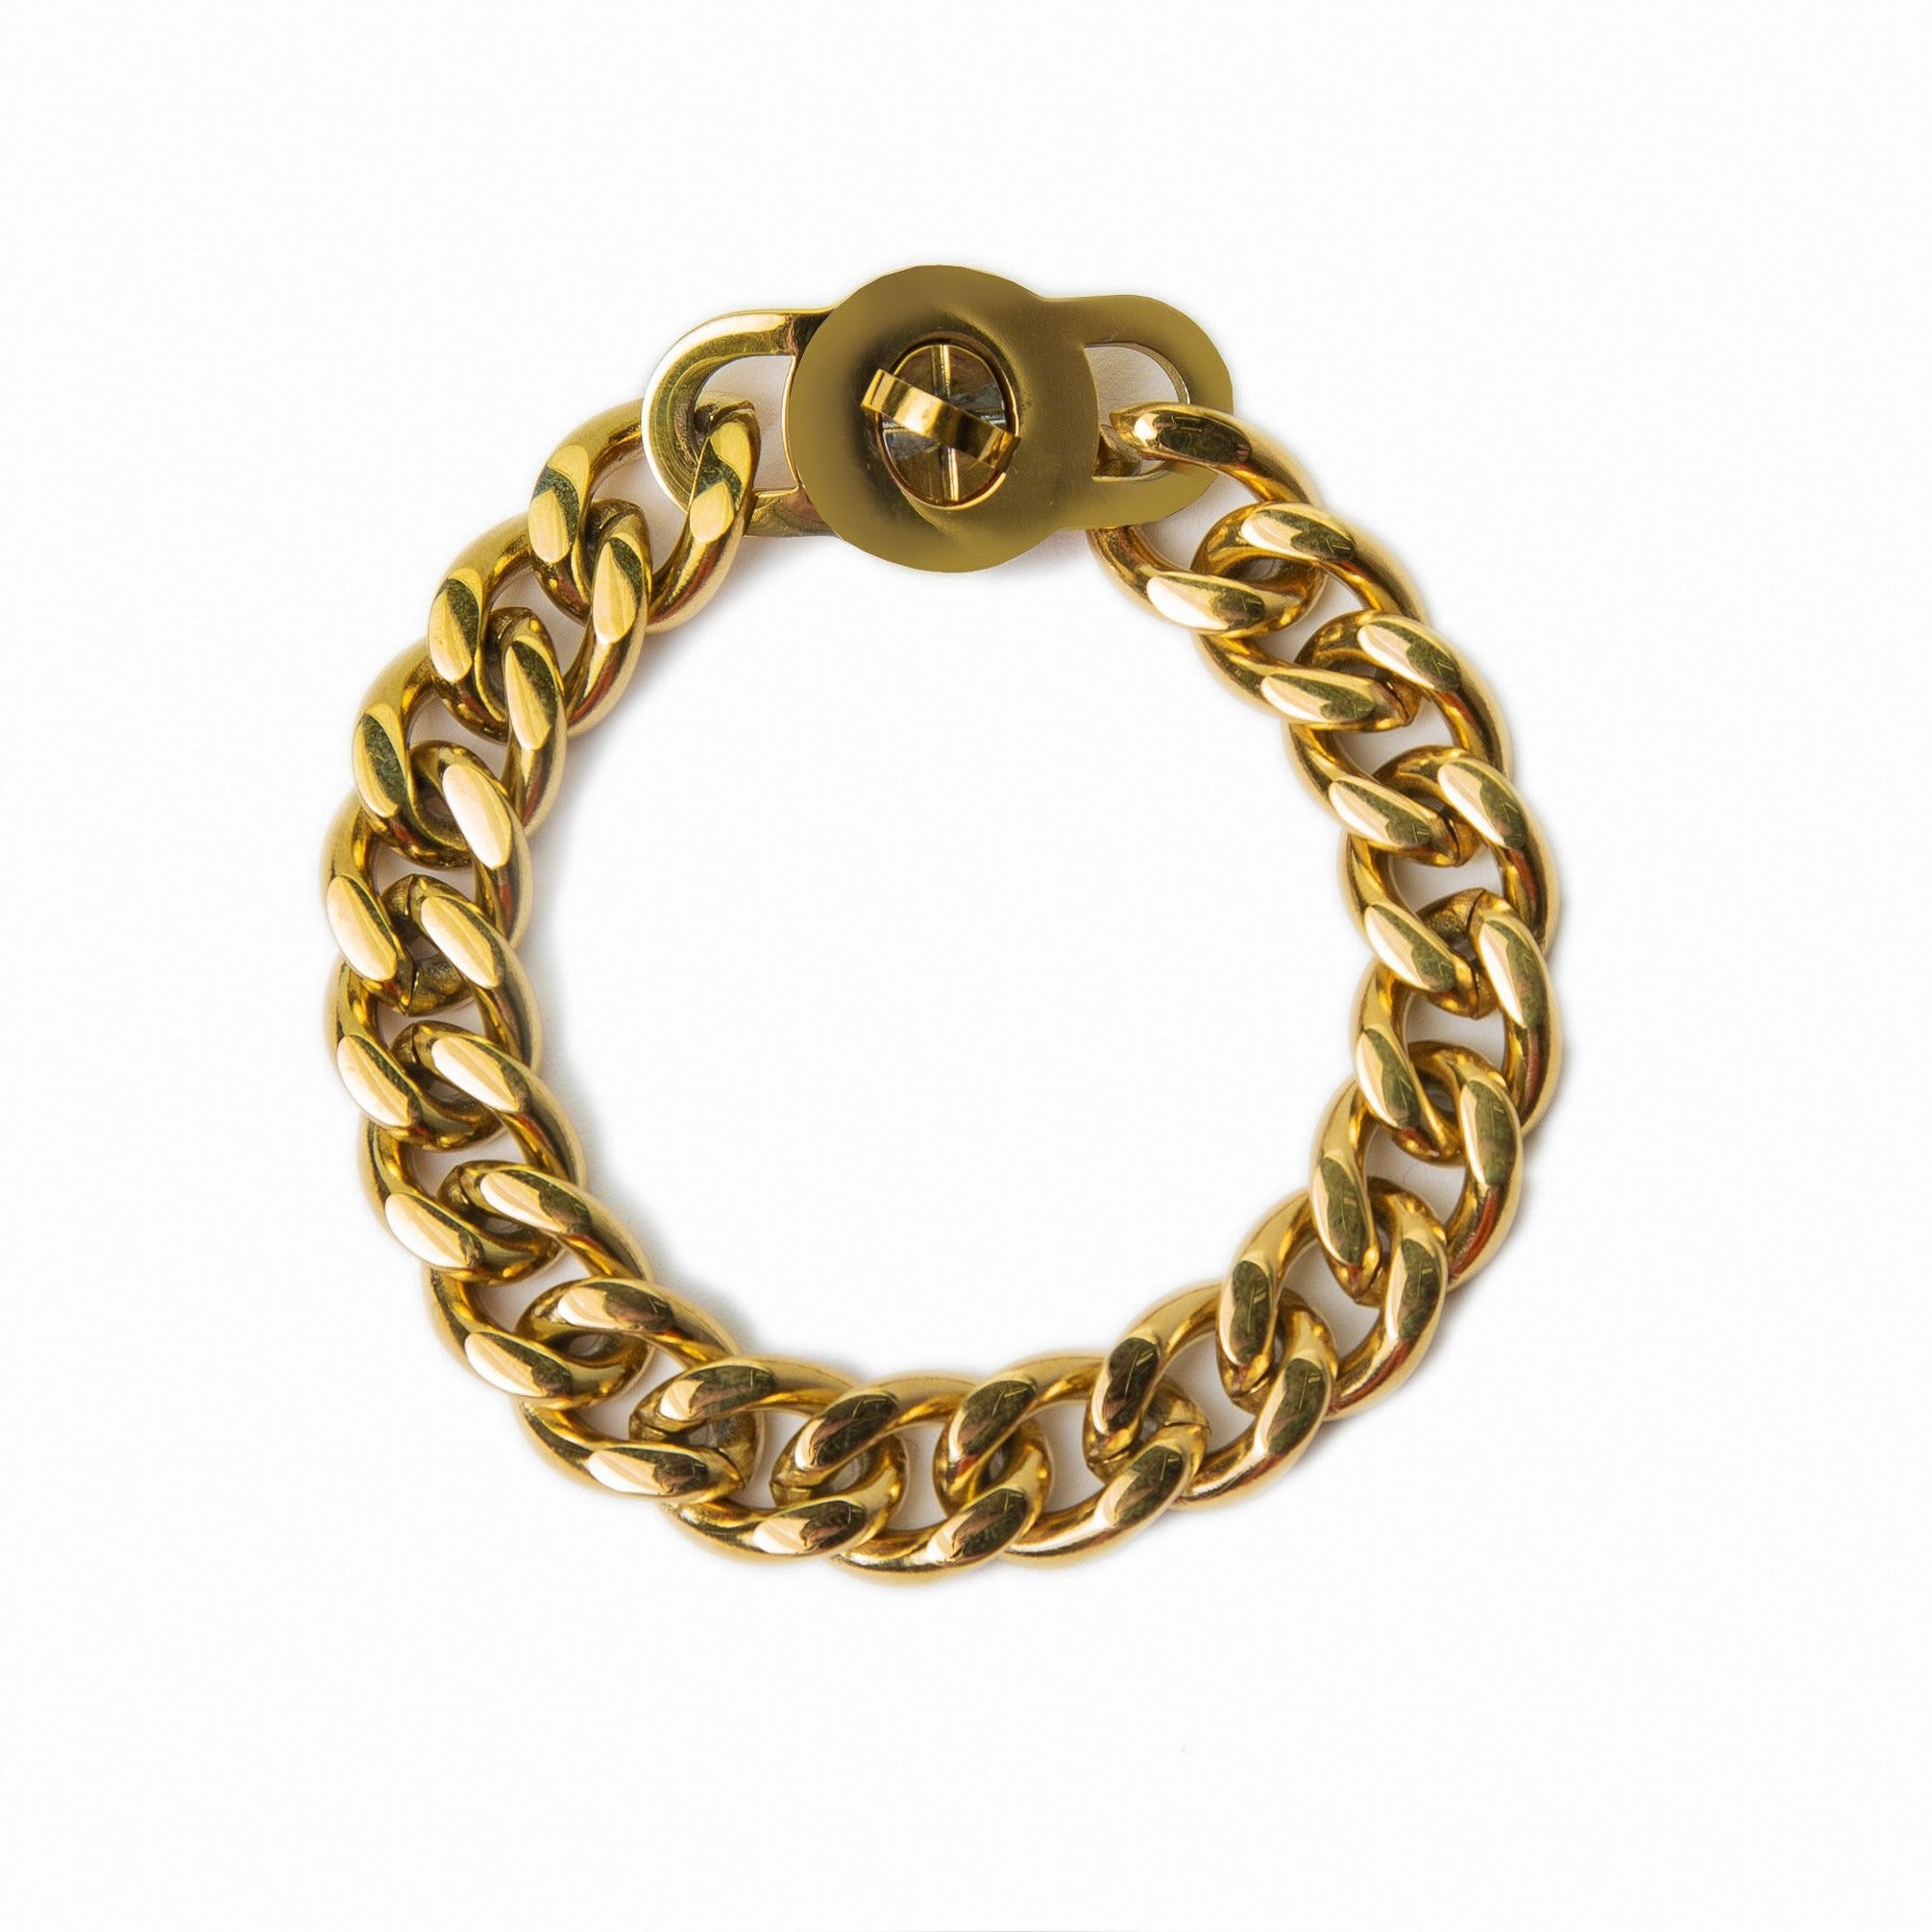 Lock Chunky Cuban Bracelet 18k Plated - Gold
USE CODE WOLF20 for 20% off